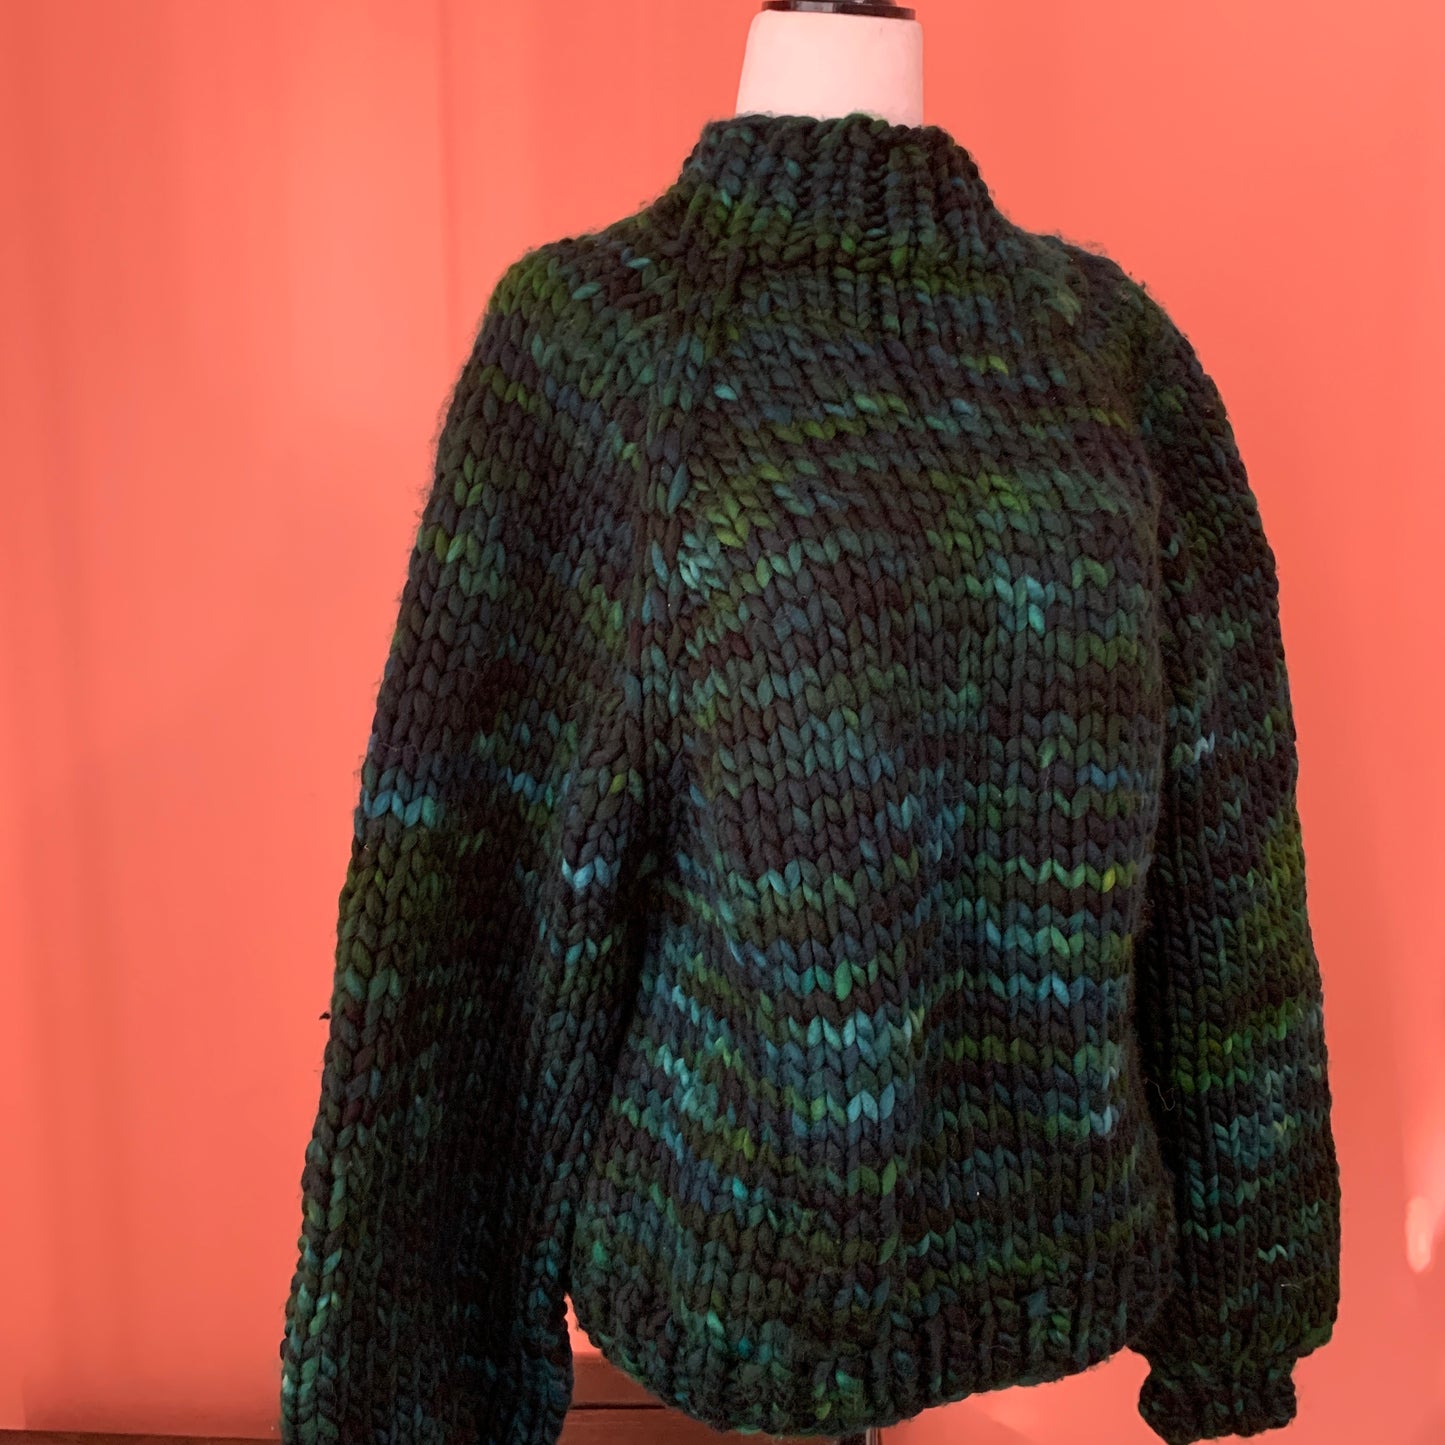 Knit to Order Pullover- Pollett's Cove